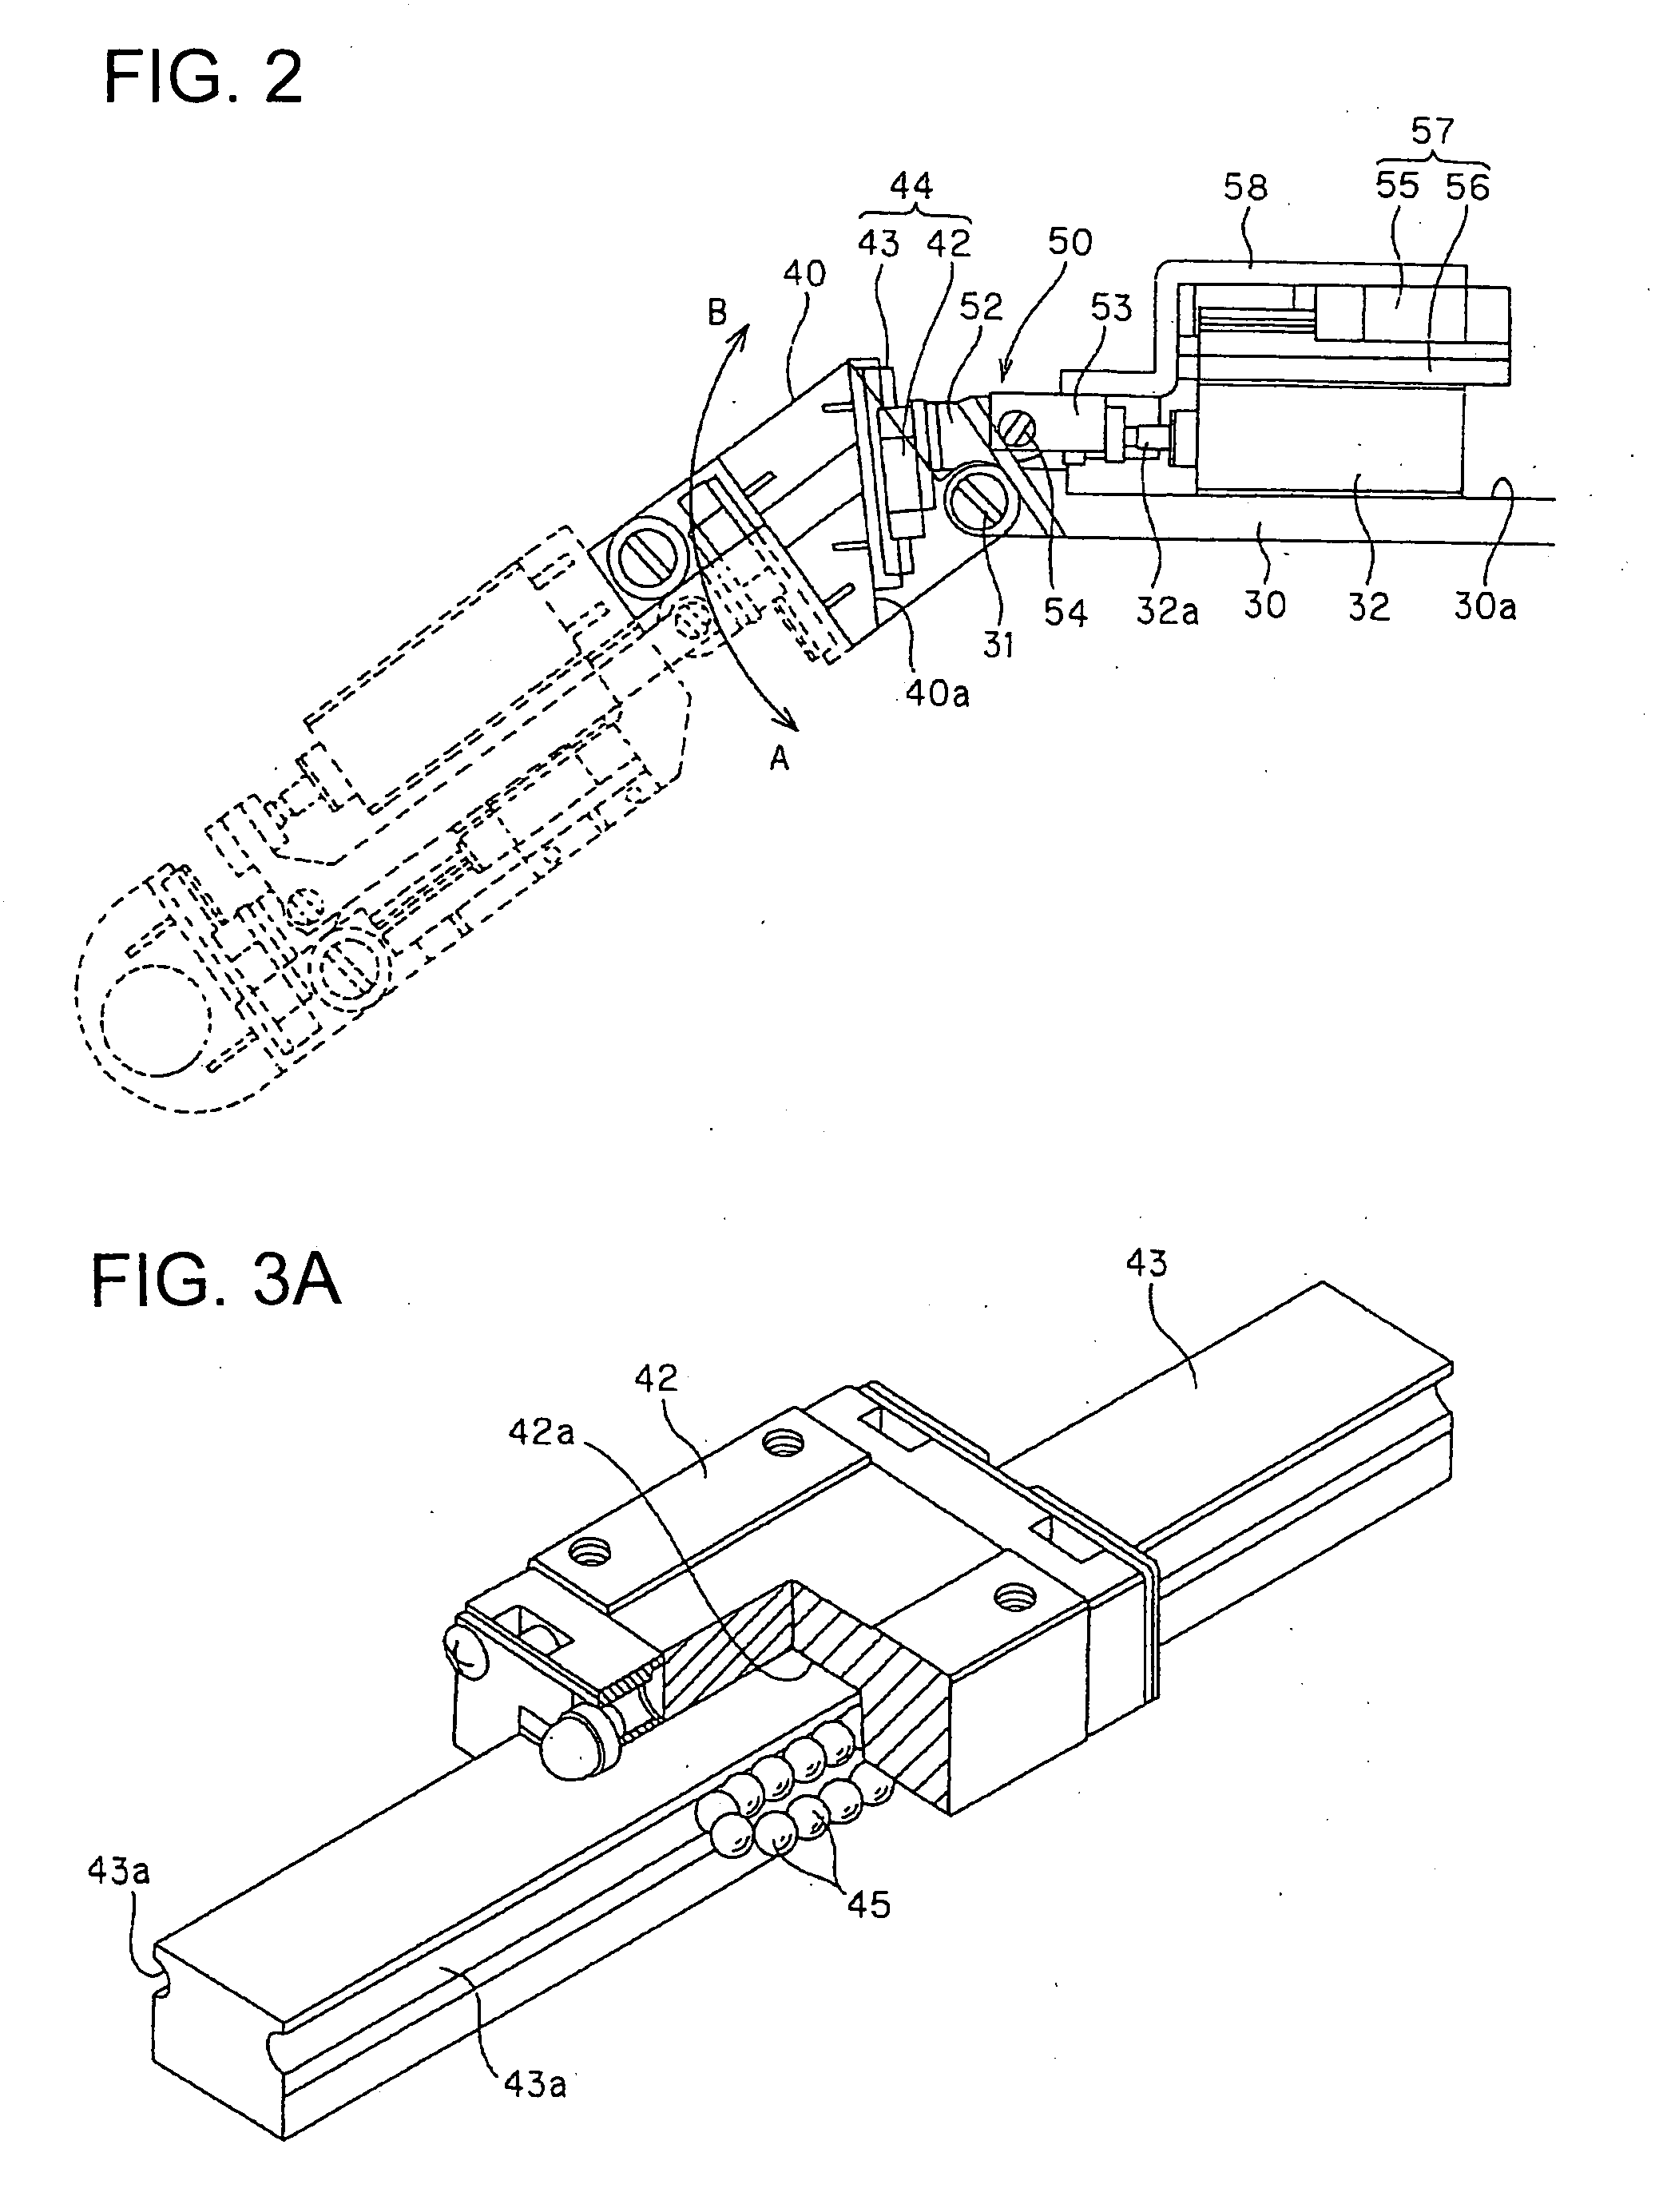 Robot Joint Structure and Robot Finger